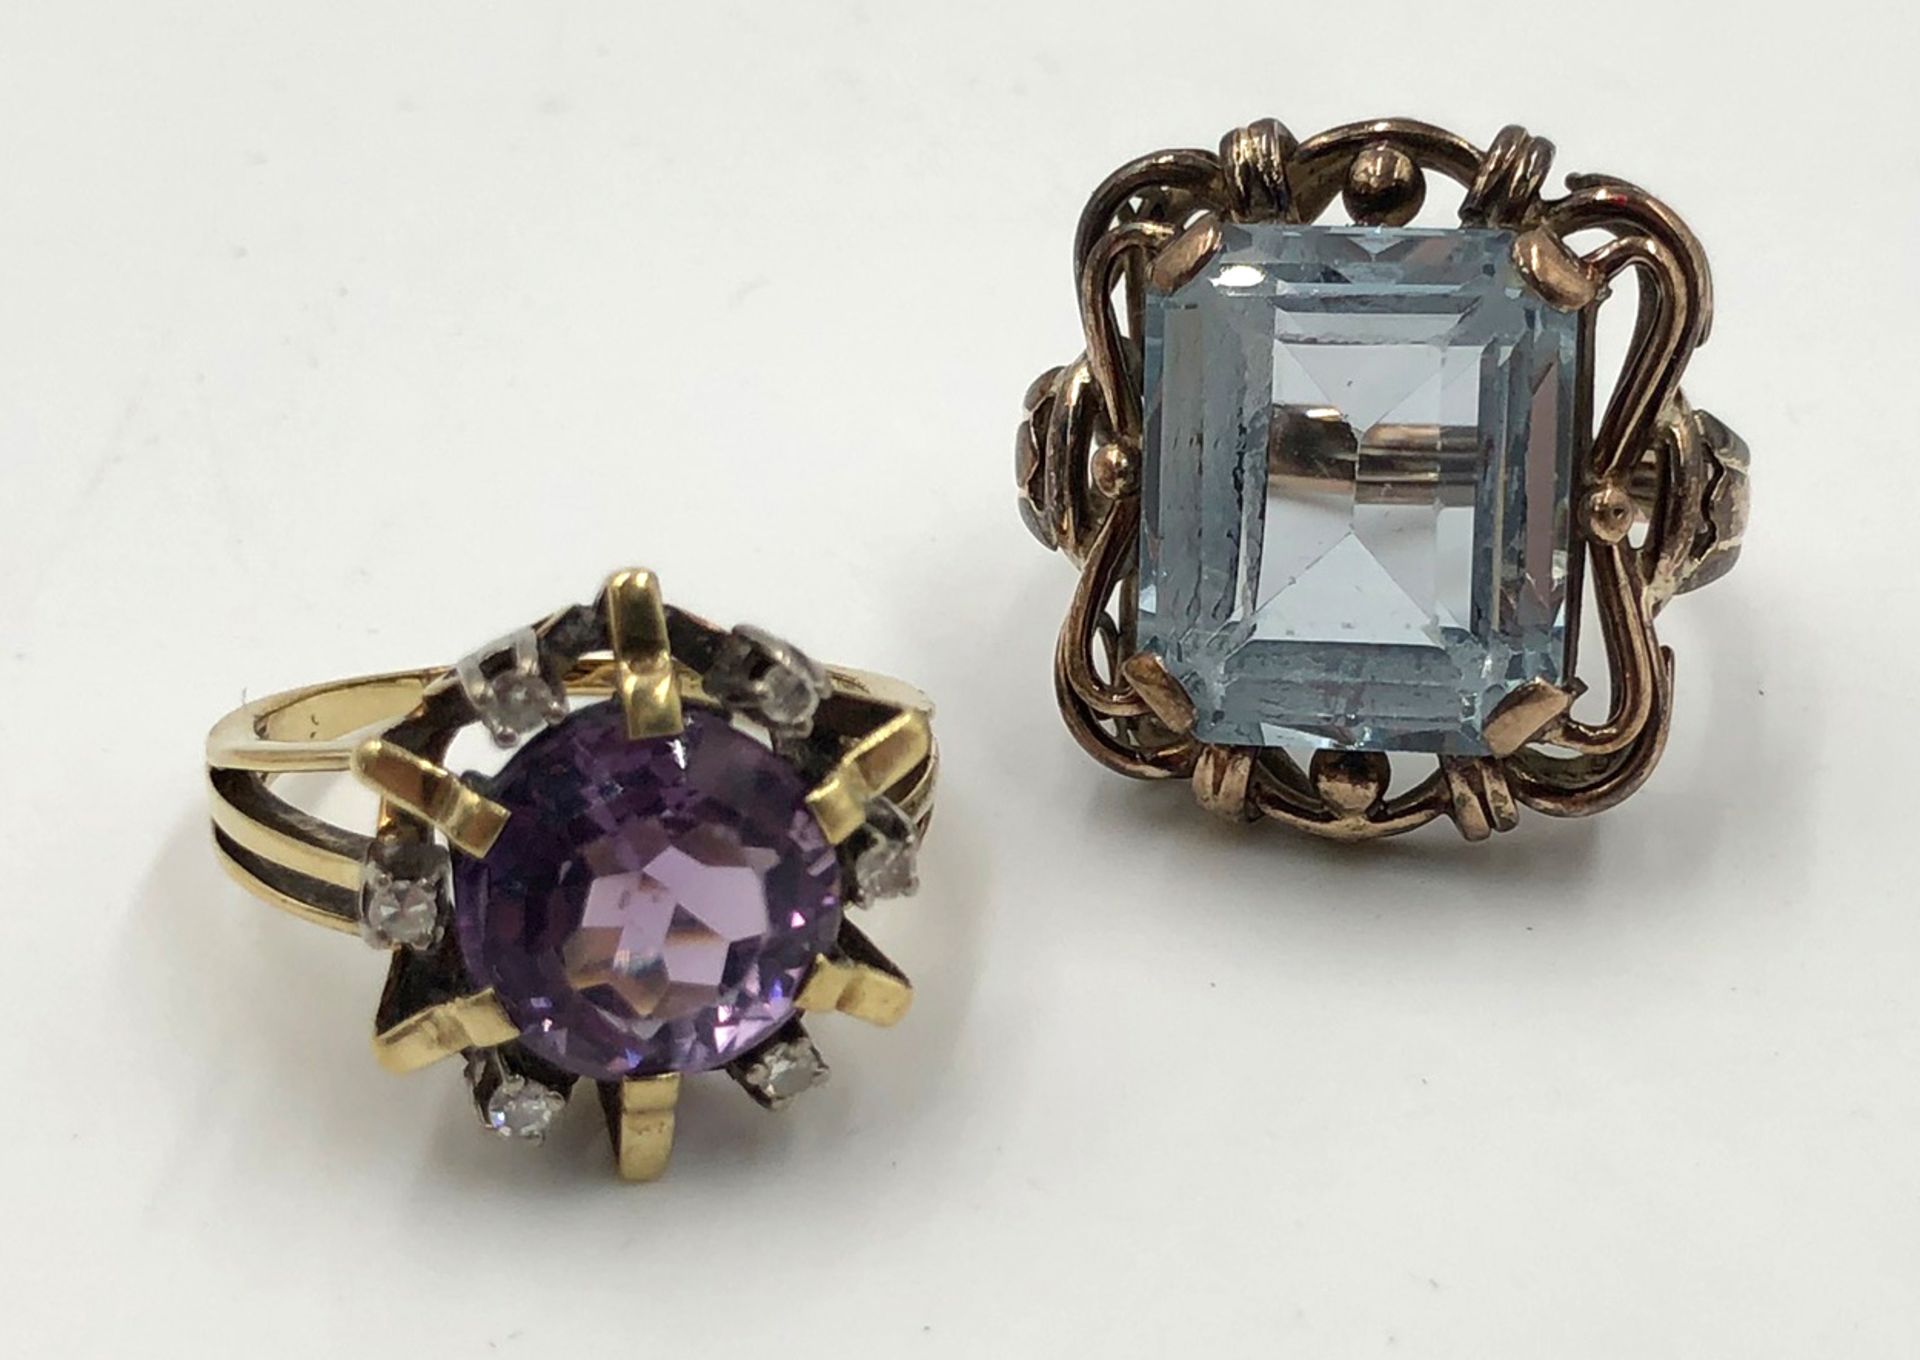 2 rings yellow gold 585.One with amethyst and 6 small diamonds. The other ring with a light blue